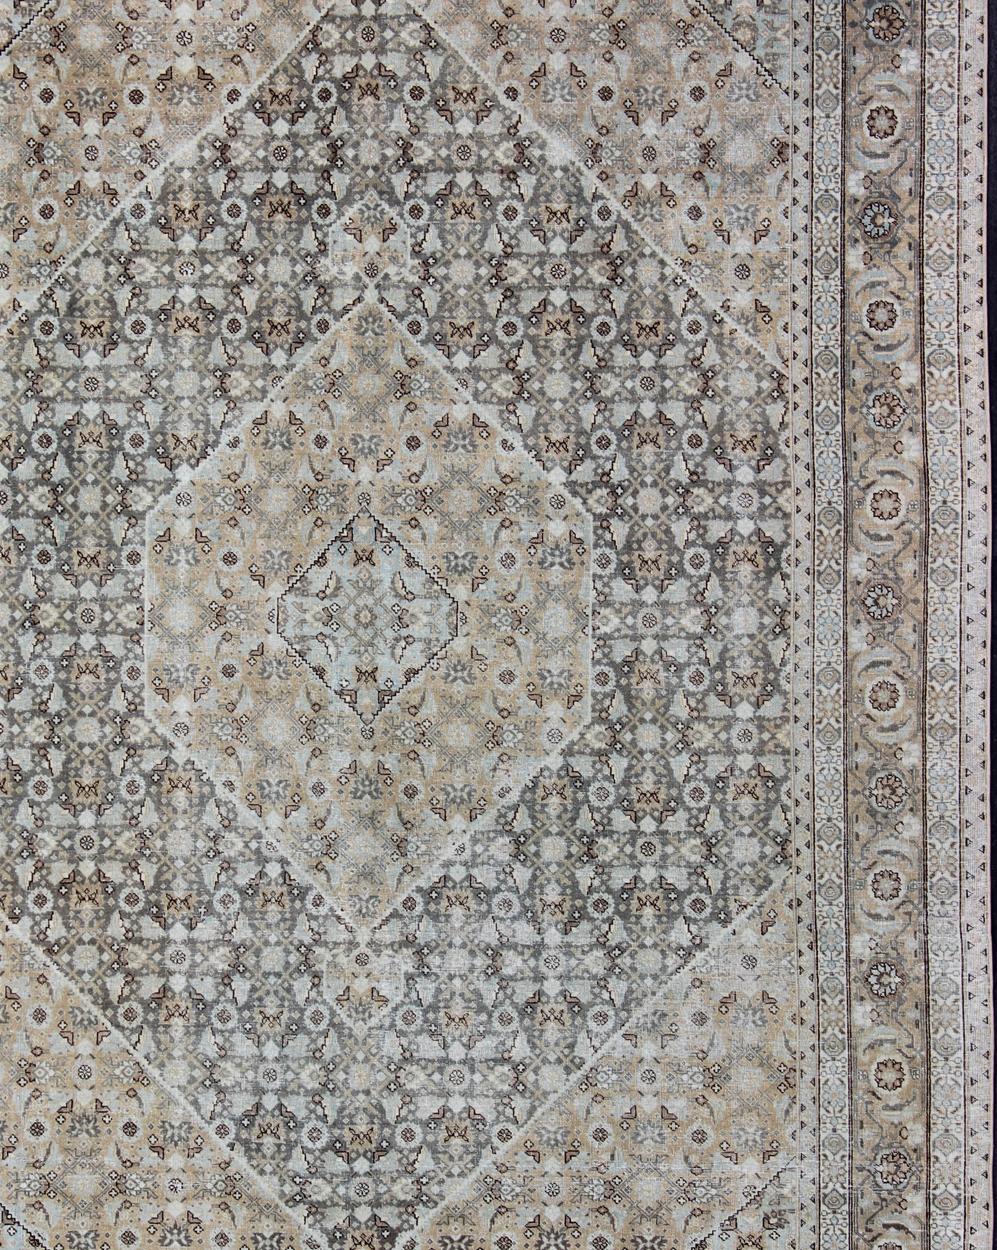 Hand-Knotted Antique Persian Tabriz Carpet with Geometric Diamond Design in Earth Tones For Sale